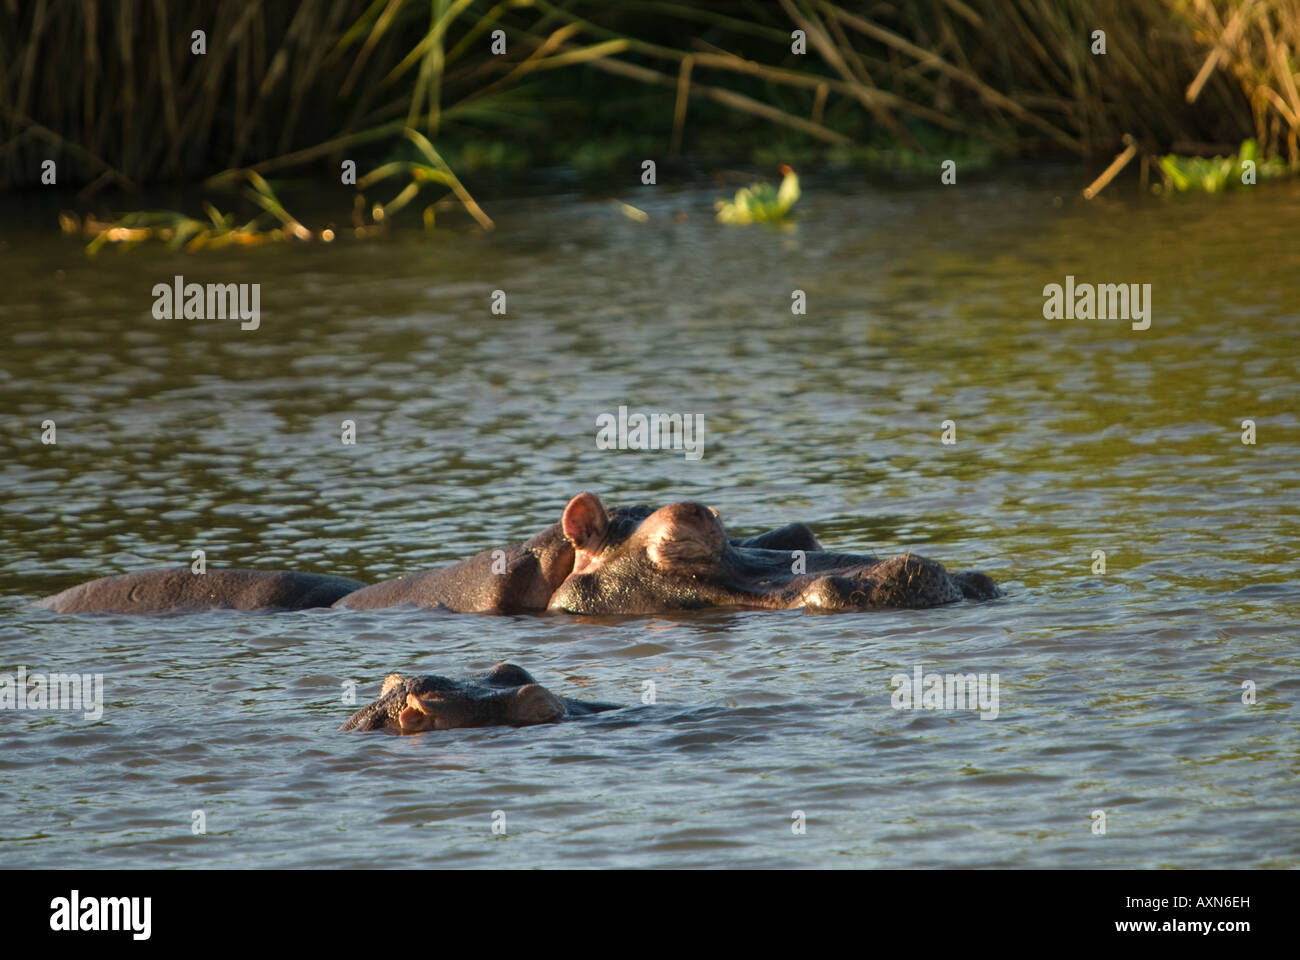 A hippo resting in a river with a young calf Stock Photo